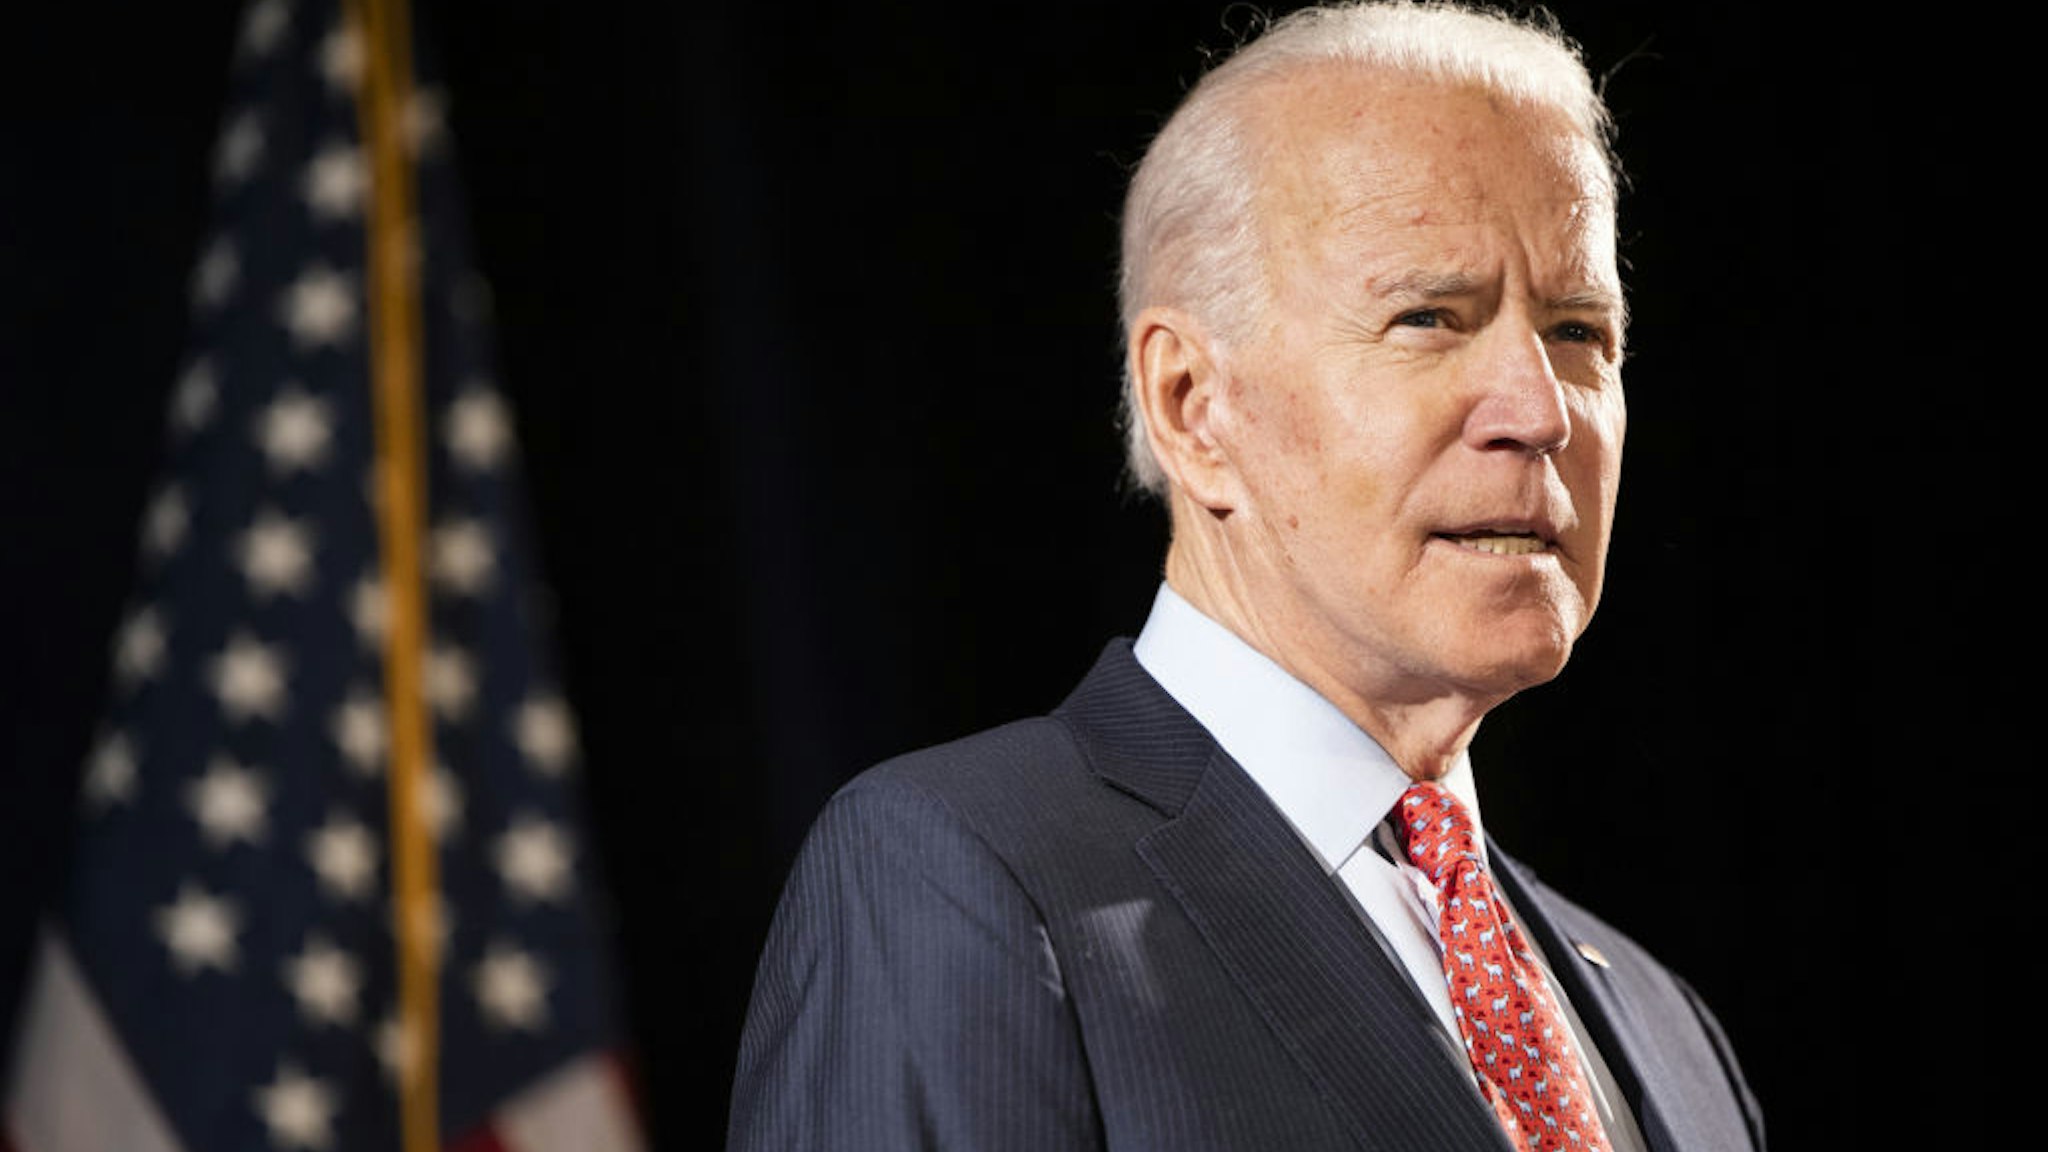 Former Vice President Joe Biden, 2020 Democratic presidential candidate, speaks during a news conference in Wilmington, Delaware, U.S., on Thursday, March 12, 2020. Biden sought to deliver an antidote to President Donald Trump's response to the coronavirus outbreak on Thursday, unveiling a new plan that shows how he would fight the spread of the virus and urging the administration to use it. Photographer: Ryan Collerd/Bloomberg